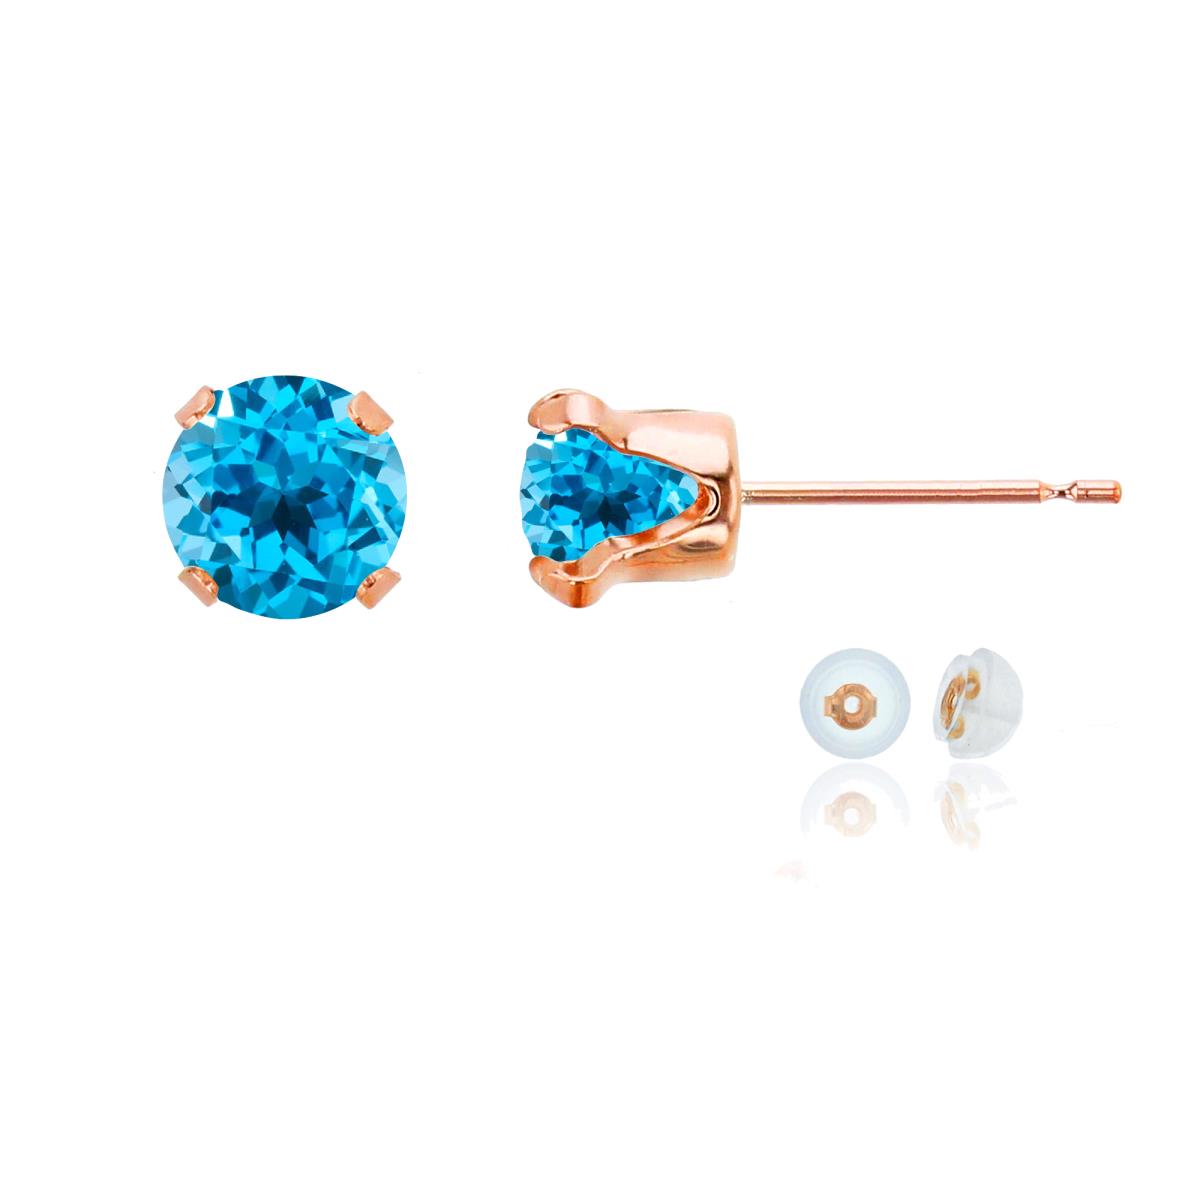 10K Rose Gold 6mm Round Swiss Blue Topaz Stud Earring with Silicone Back